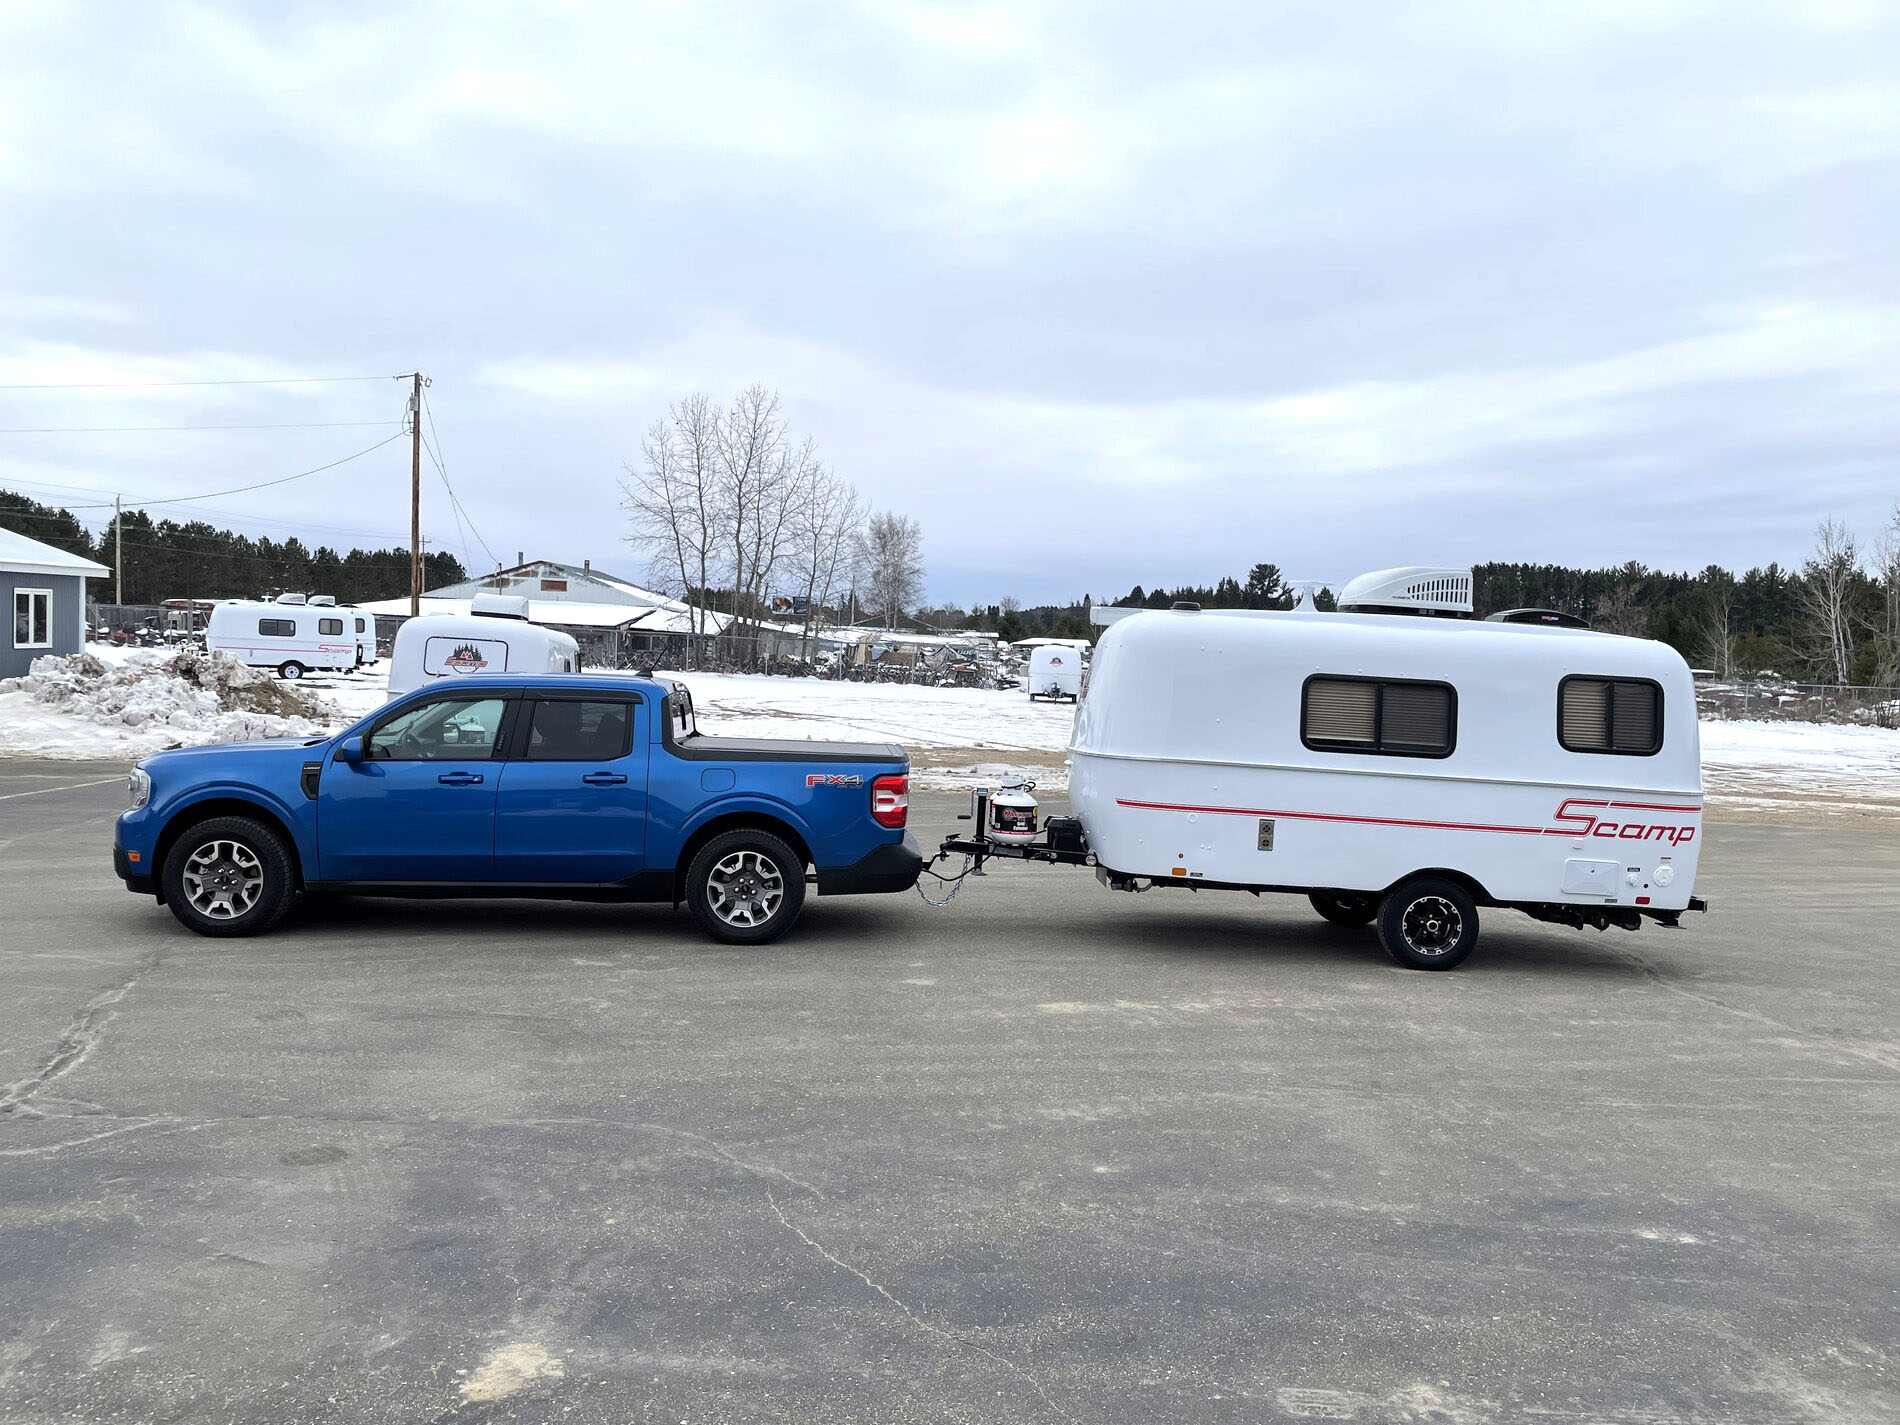 Tow report: Maverick towing 16 ft Scamp trailer (2200 lbs) for